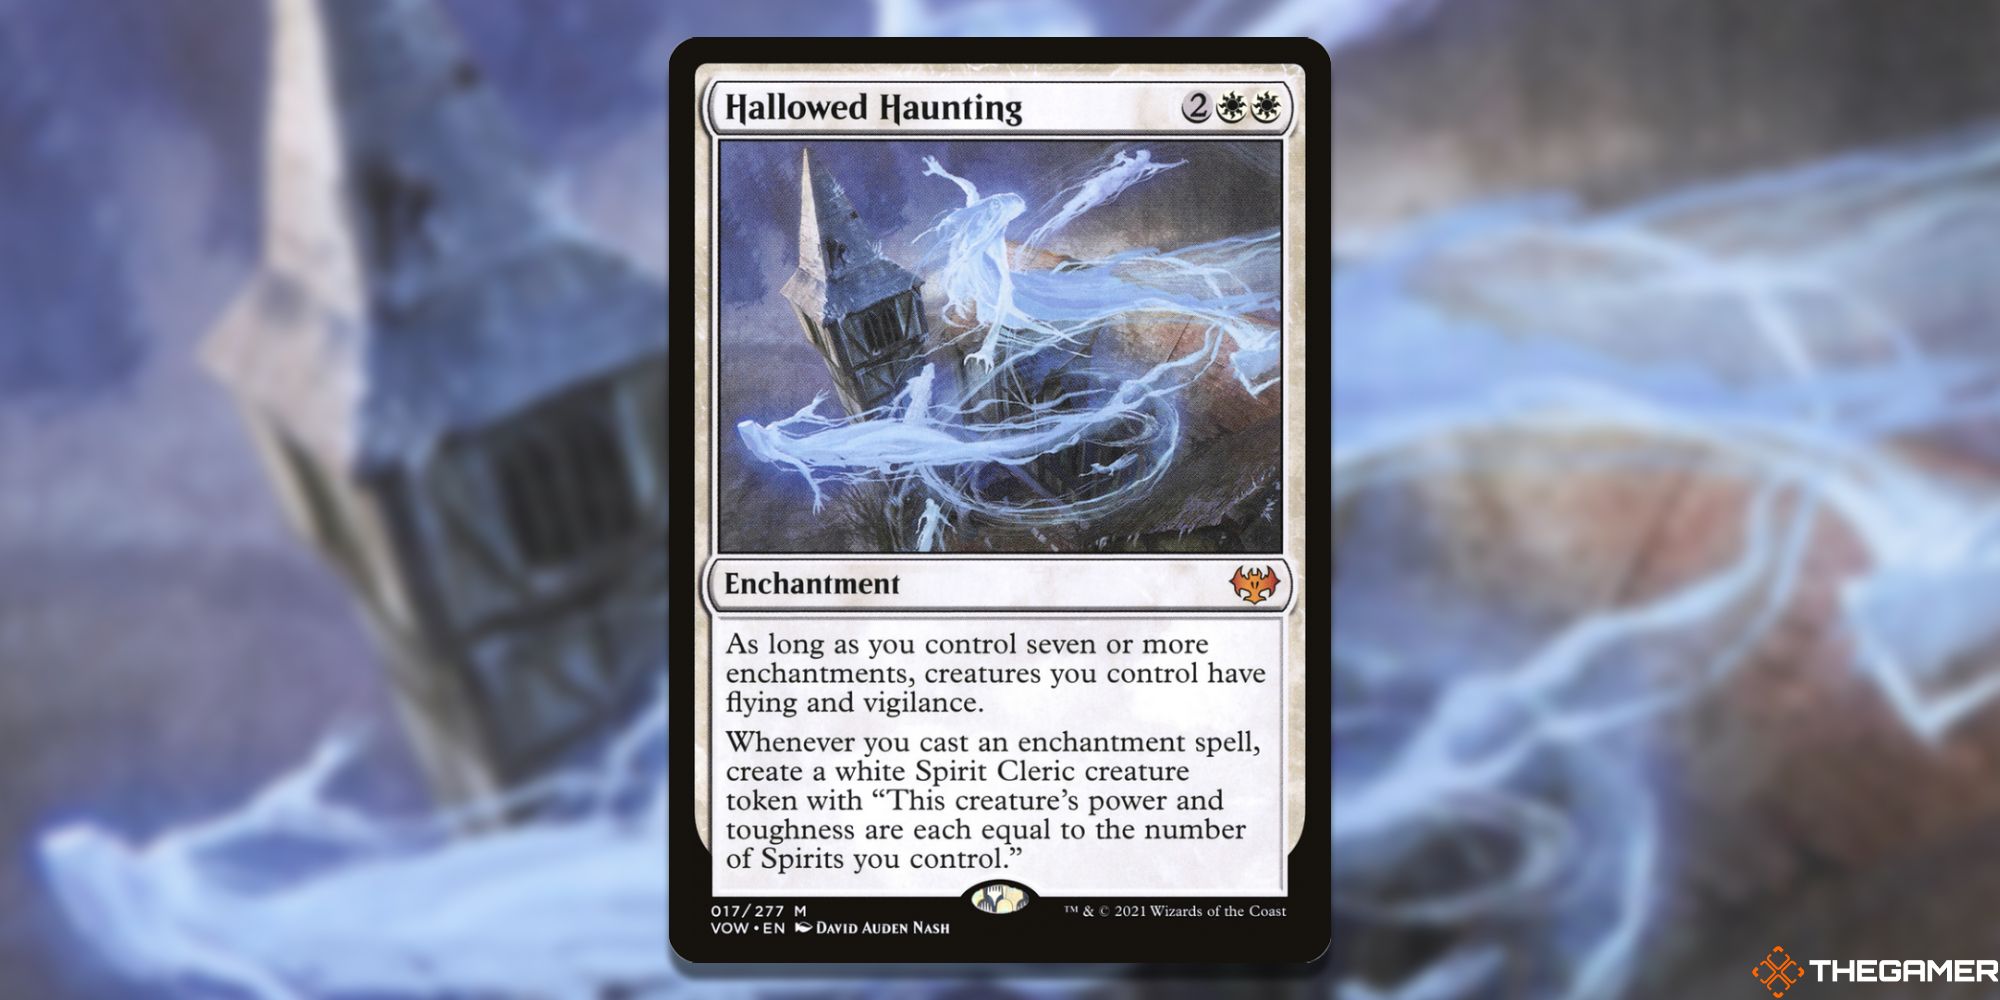 Image of the Hallowed Haunting card in Magic: The Gathering, with art by David Auden Nash